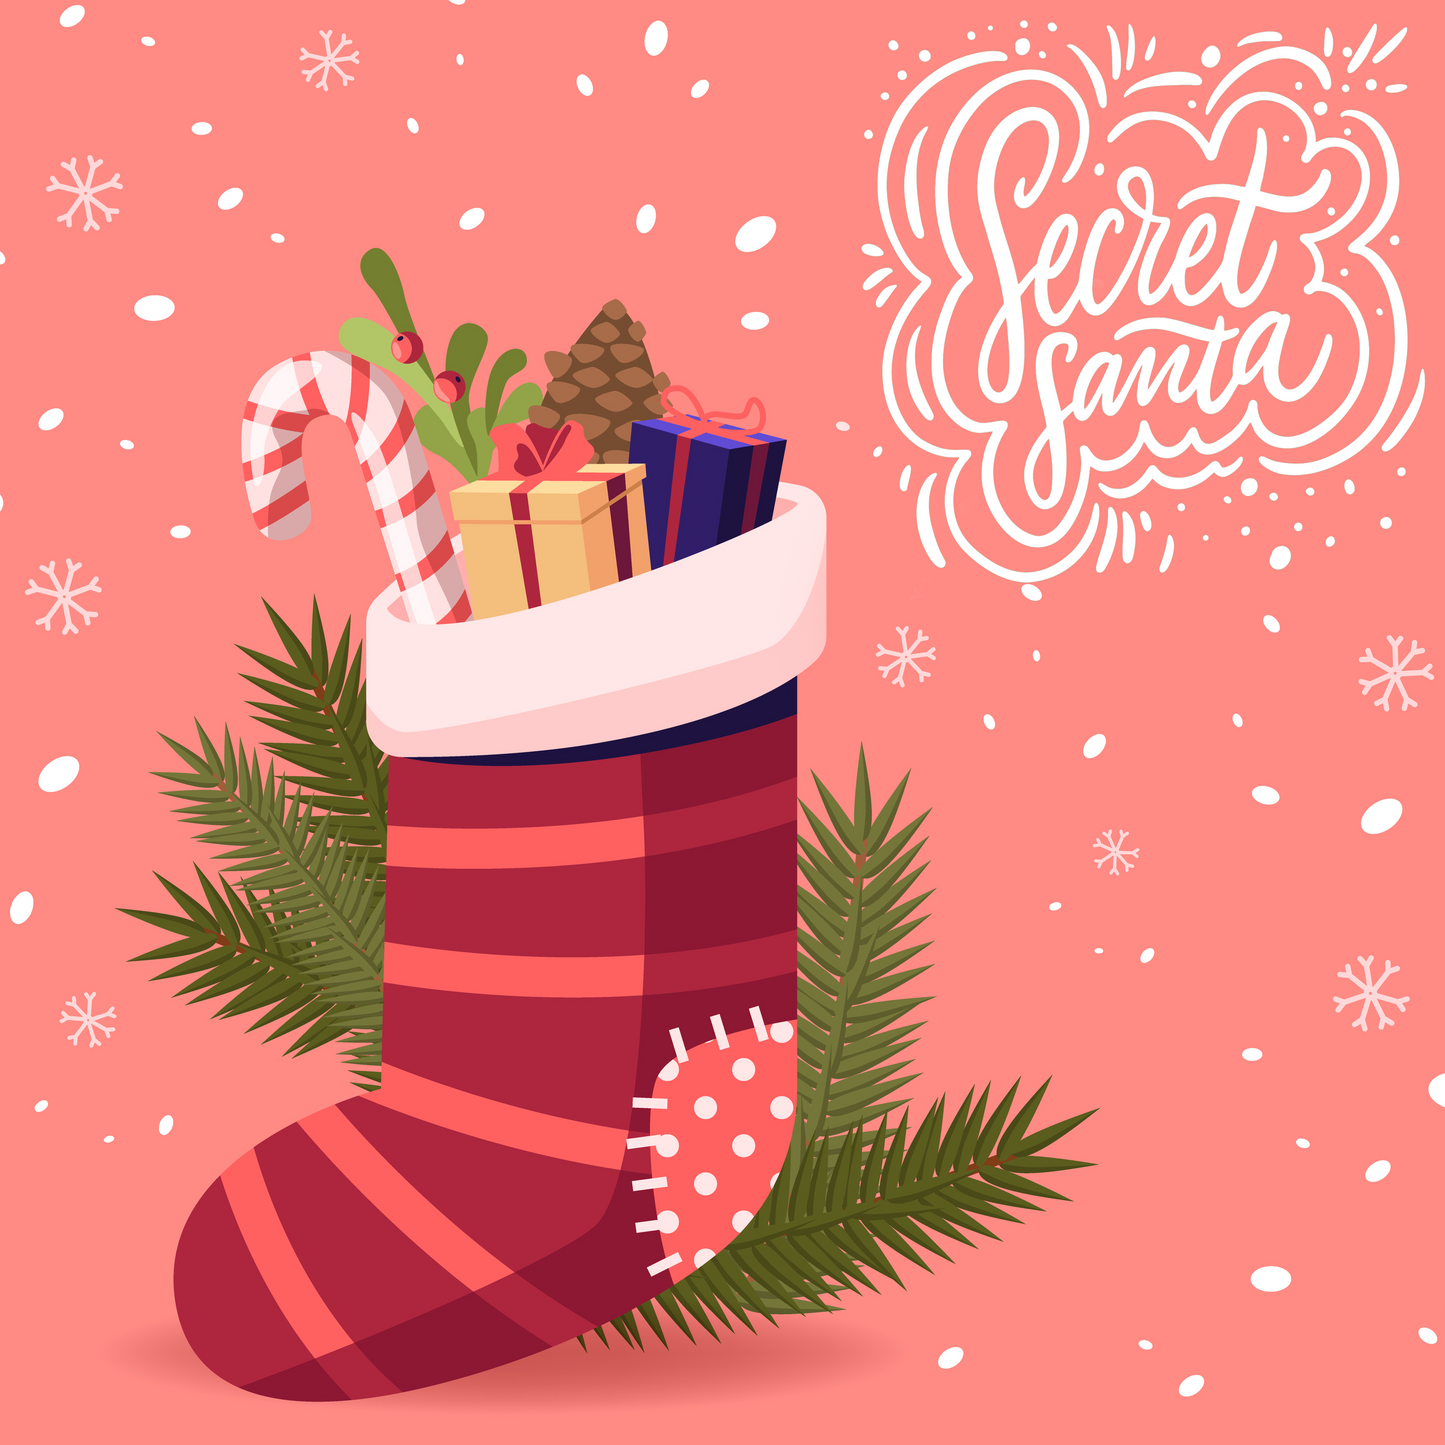 Health Nuts Secret Santa Stocking, Send It Direct To Your Loved One! 🎅